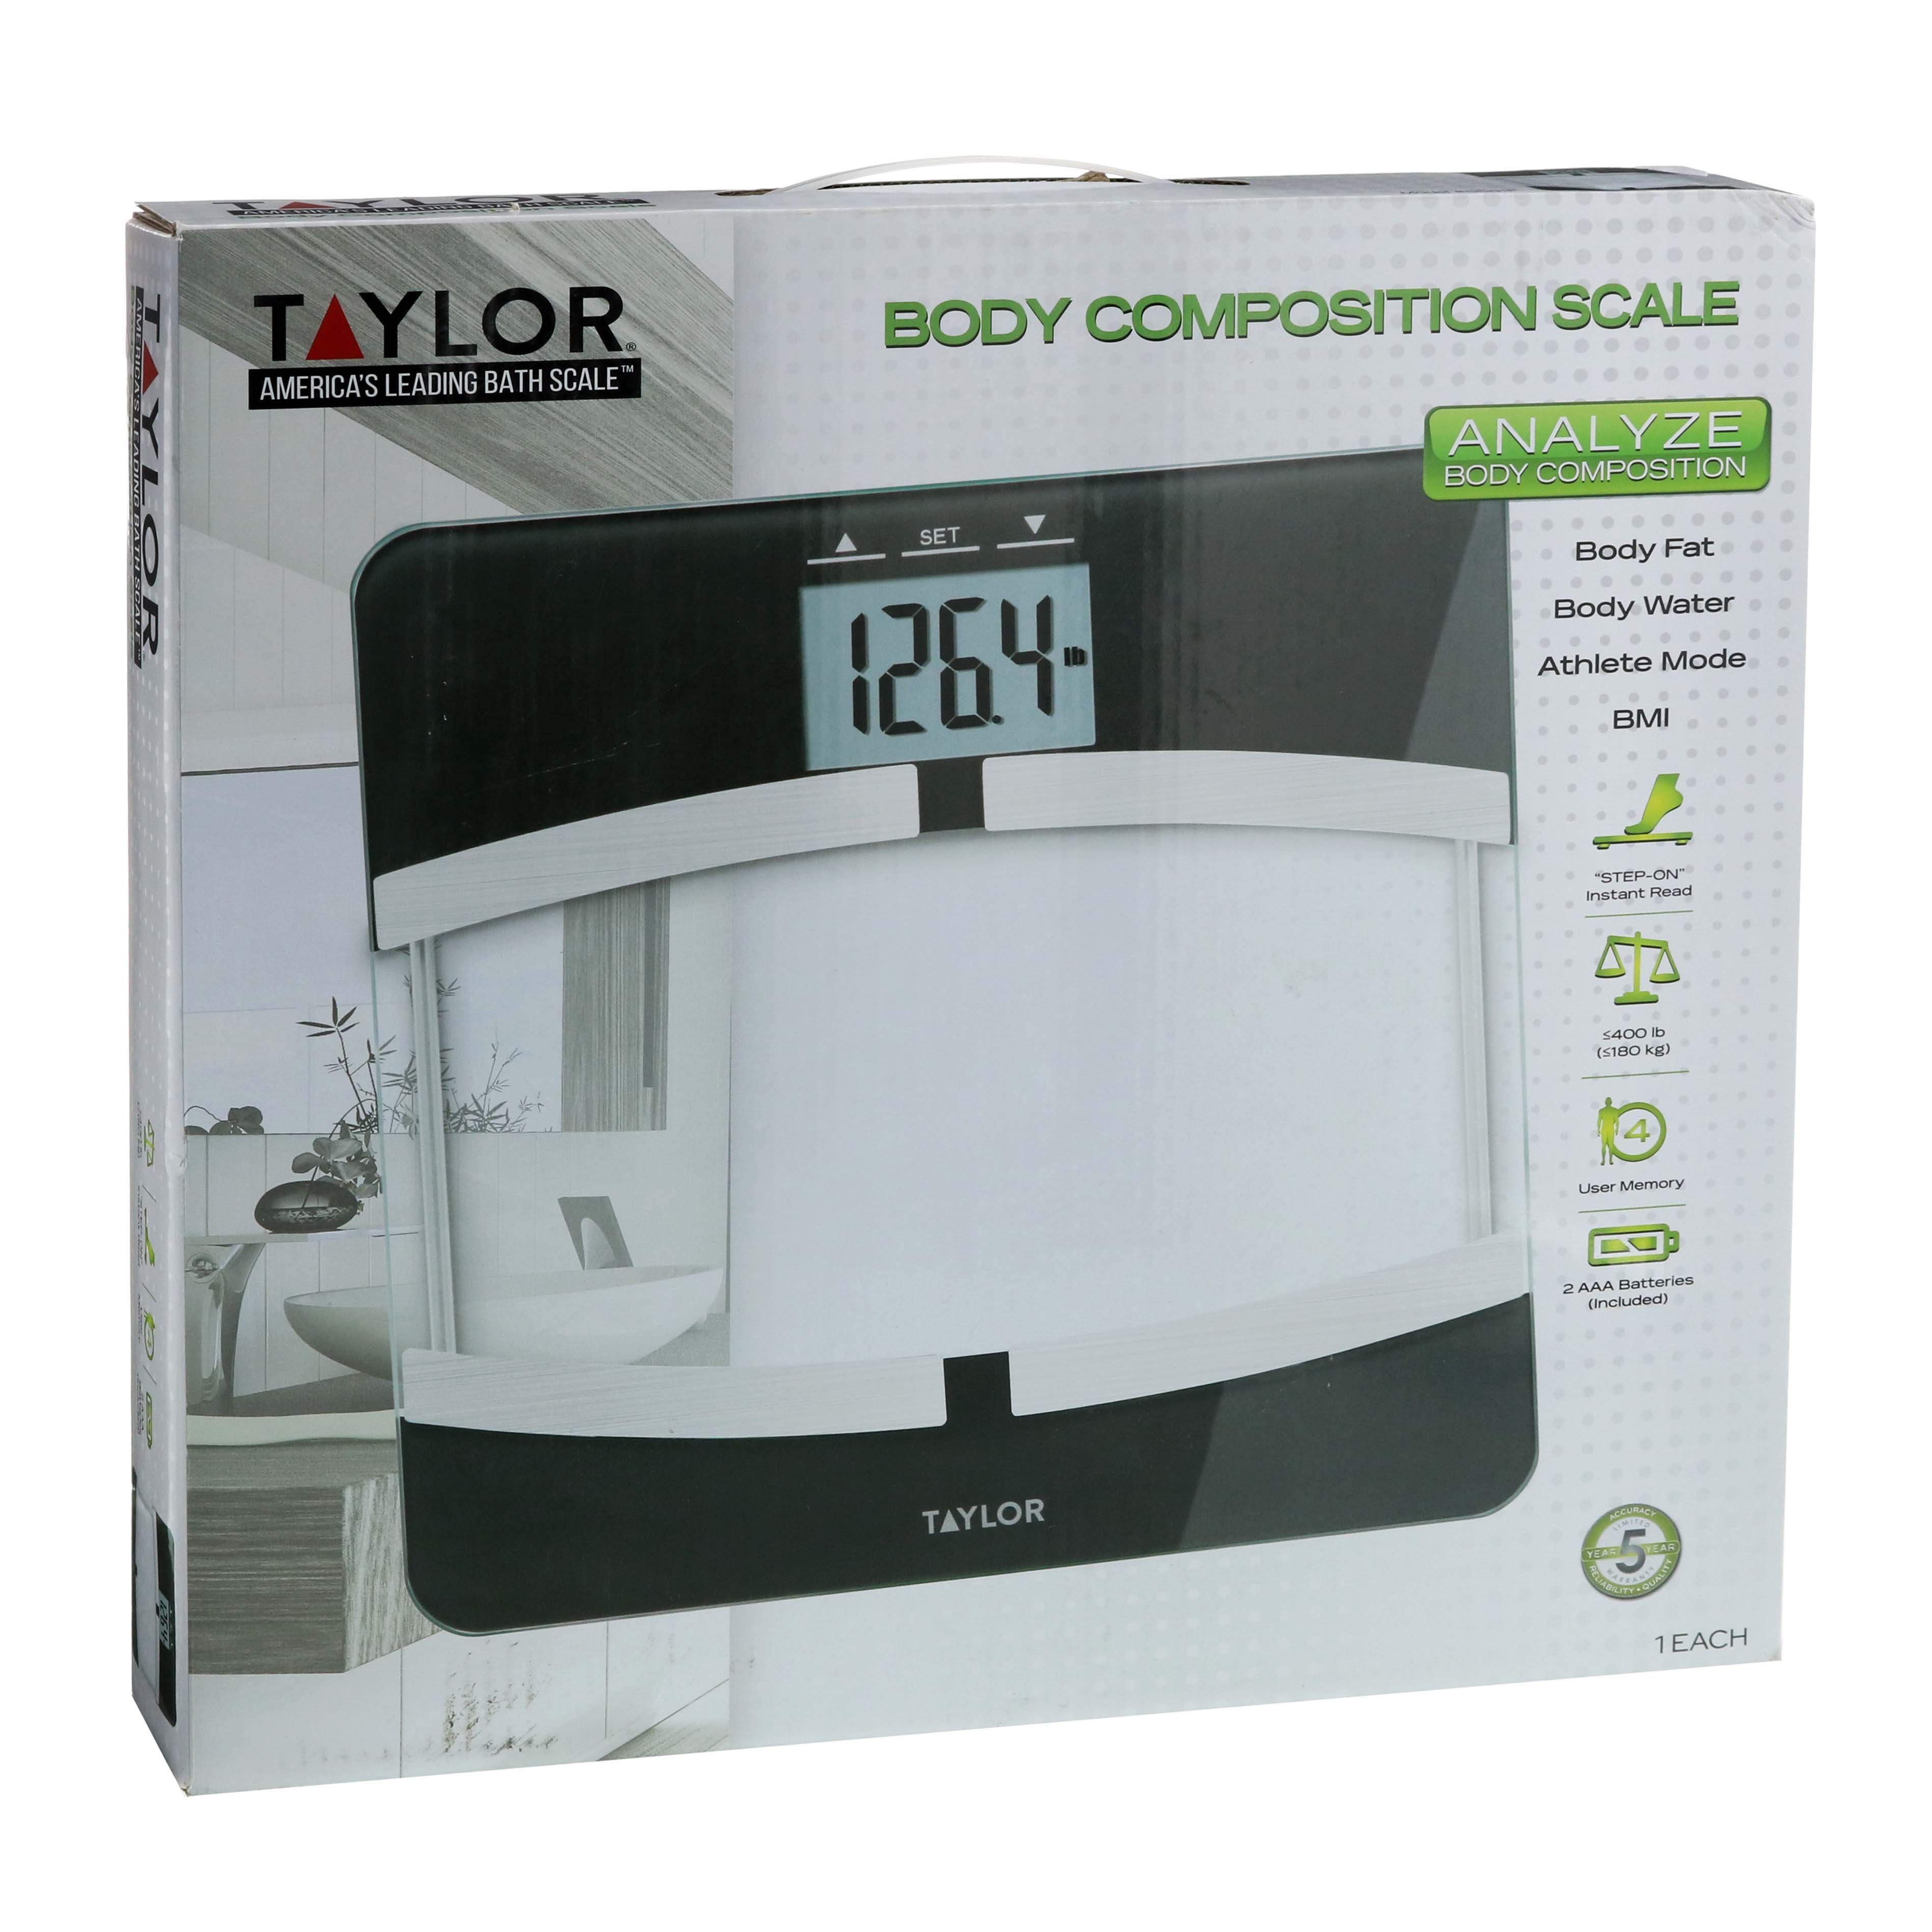 Taylor Stainless Steel Digital Kitchen Scale - Shop Utensils & Gadgets at  H-E-B